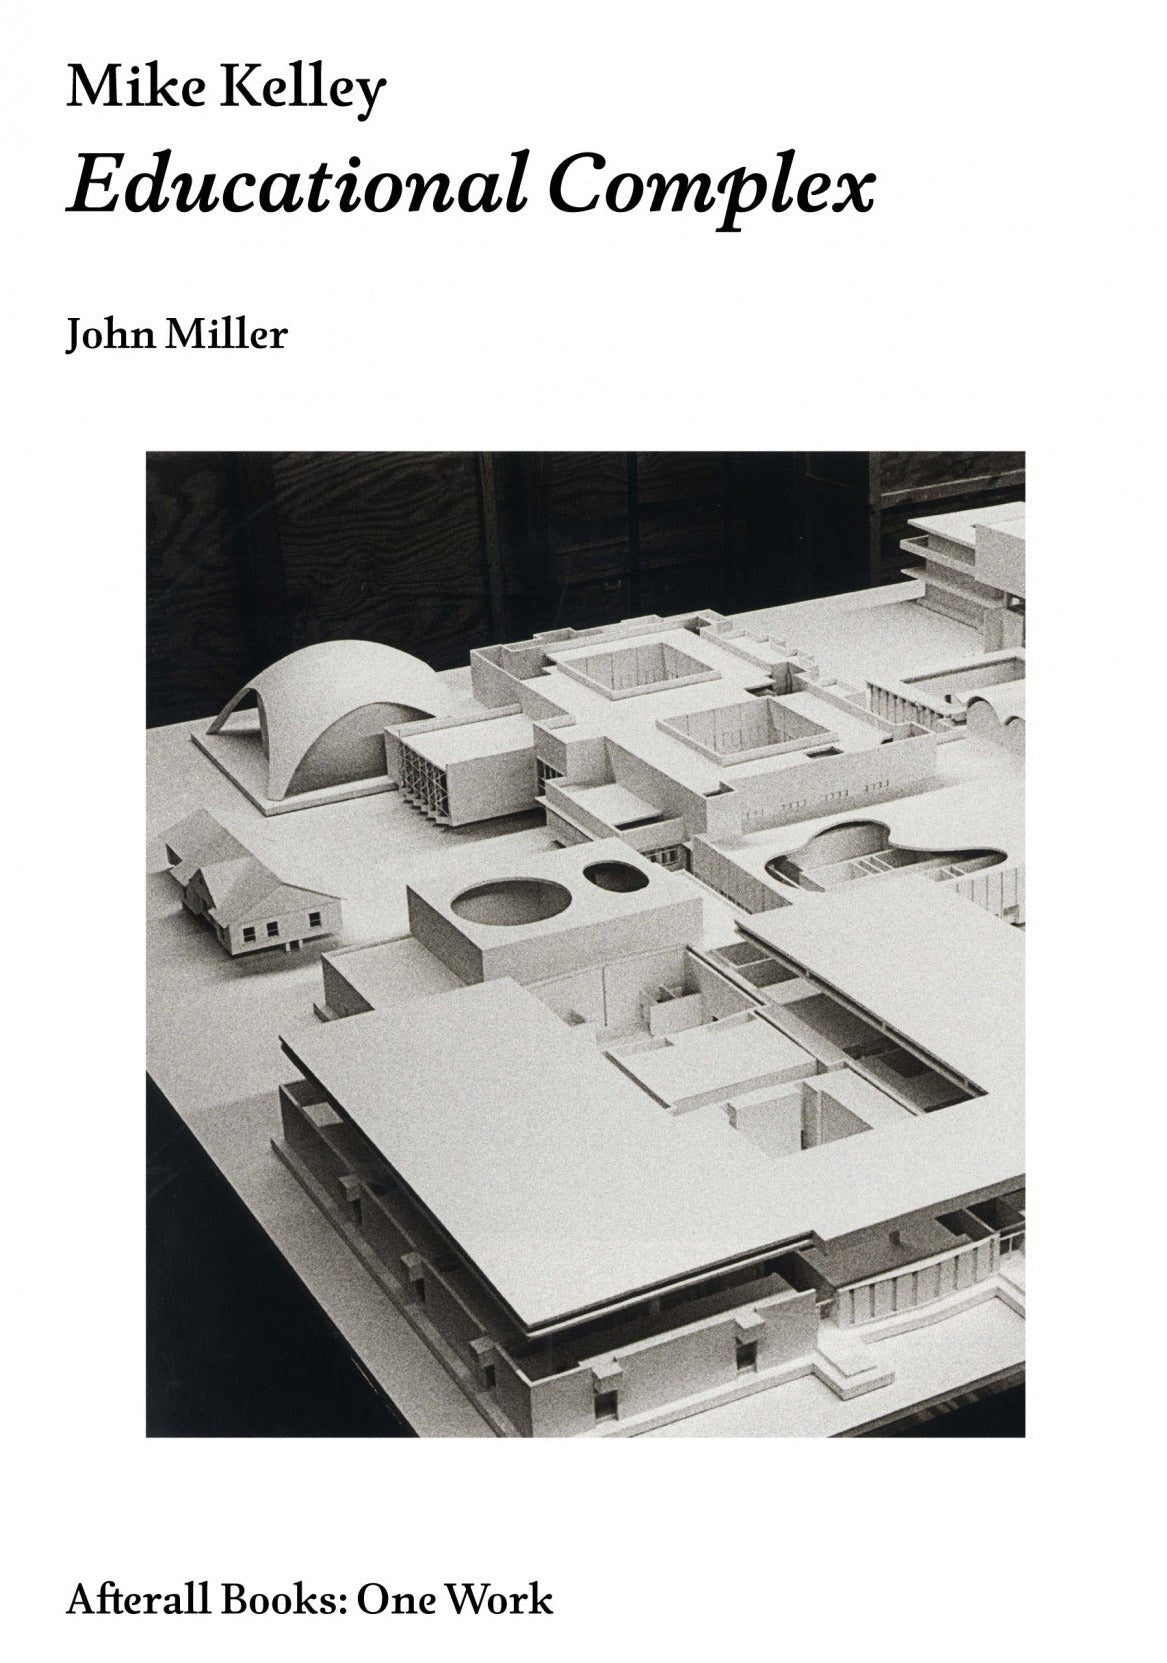 Mike Kelley: Educational Complex